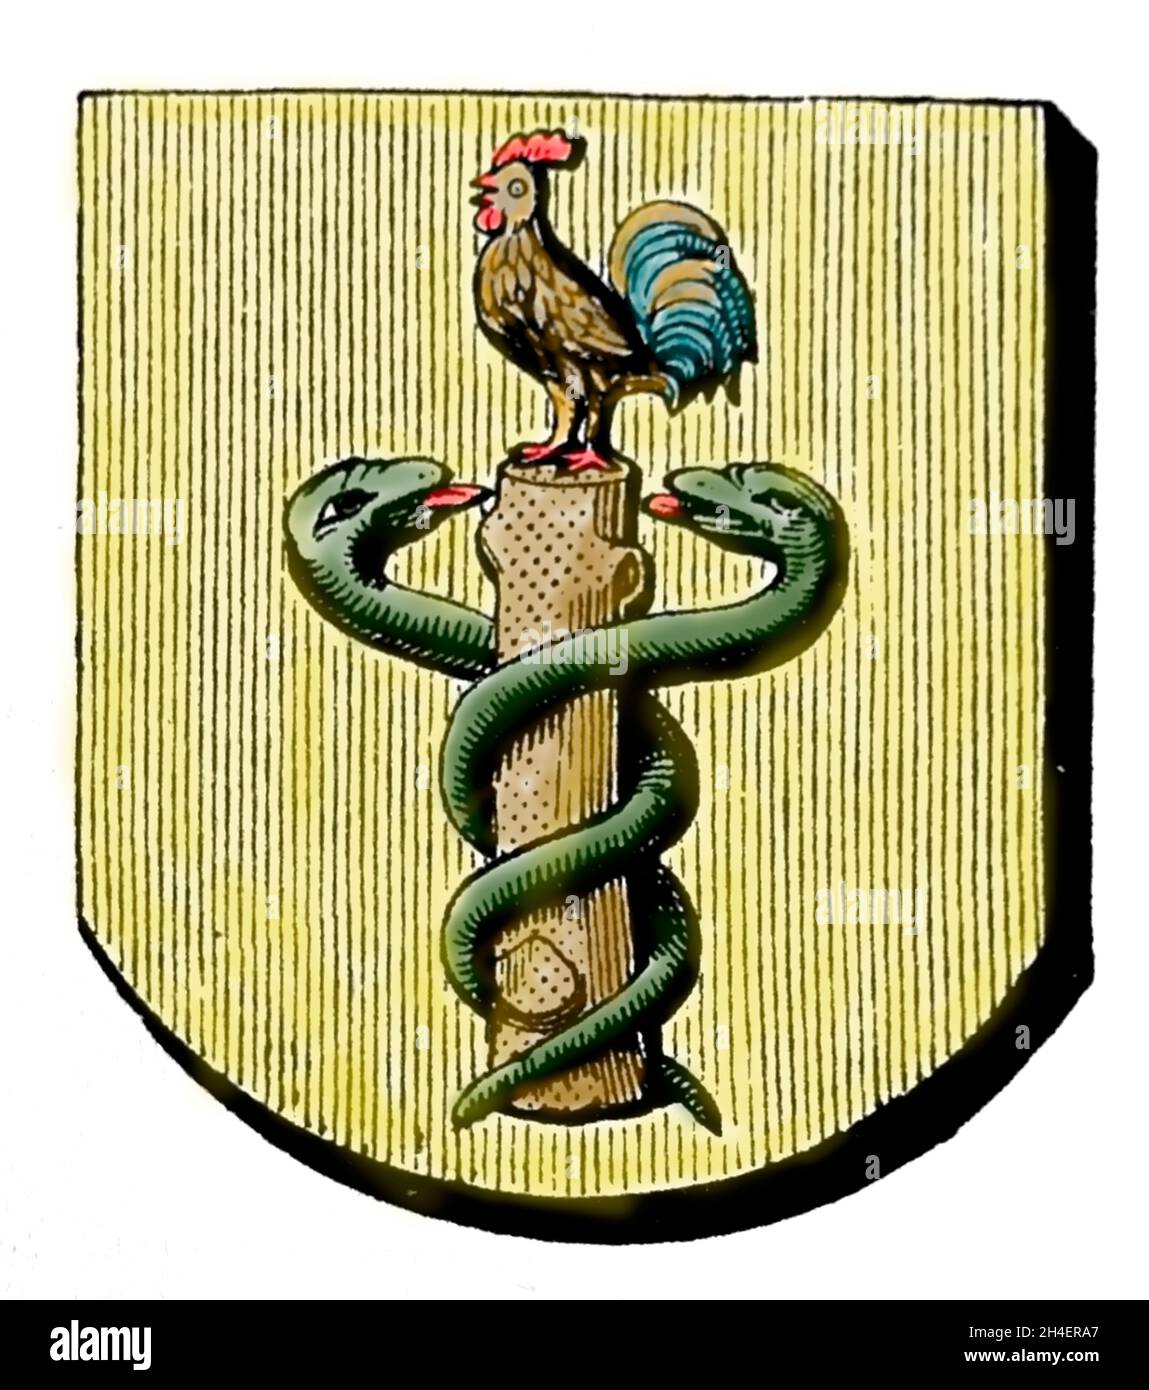 Banner of the corporation of physicians at Vire. Illustration. Stock Photo